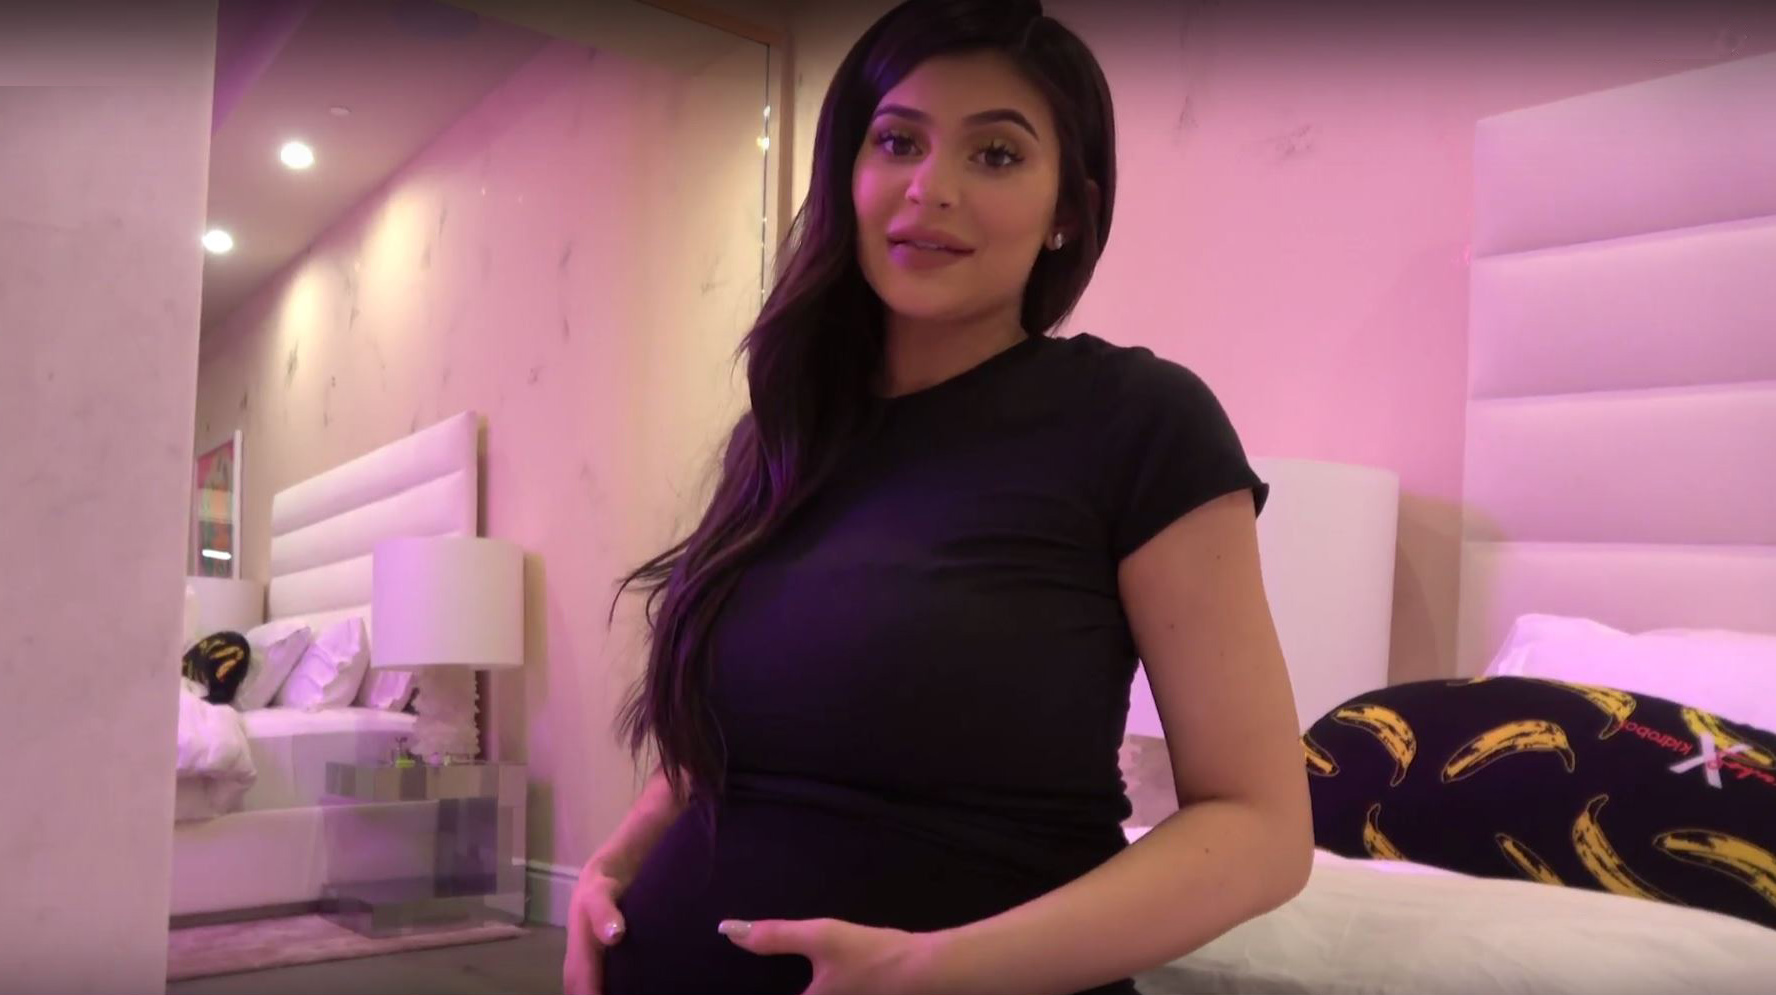 Kylie Jenner gives birth to baby girl